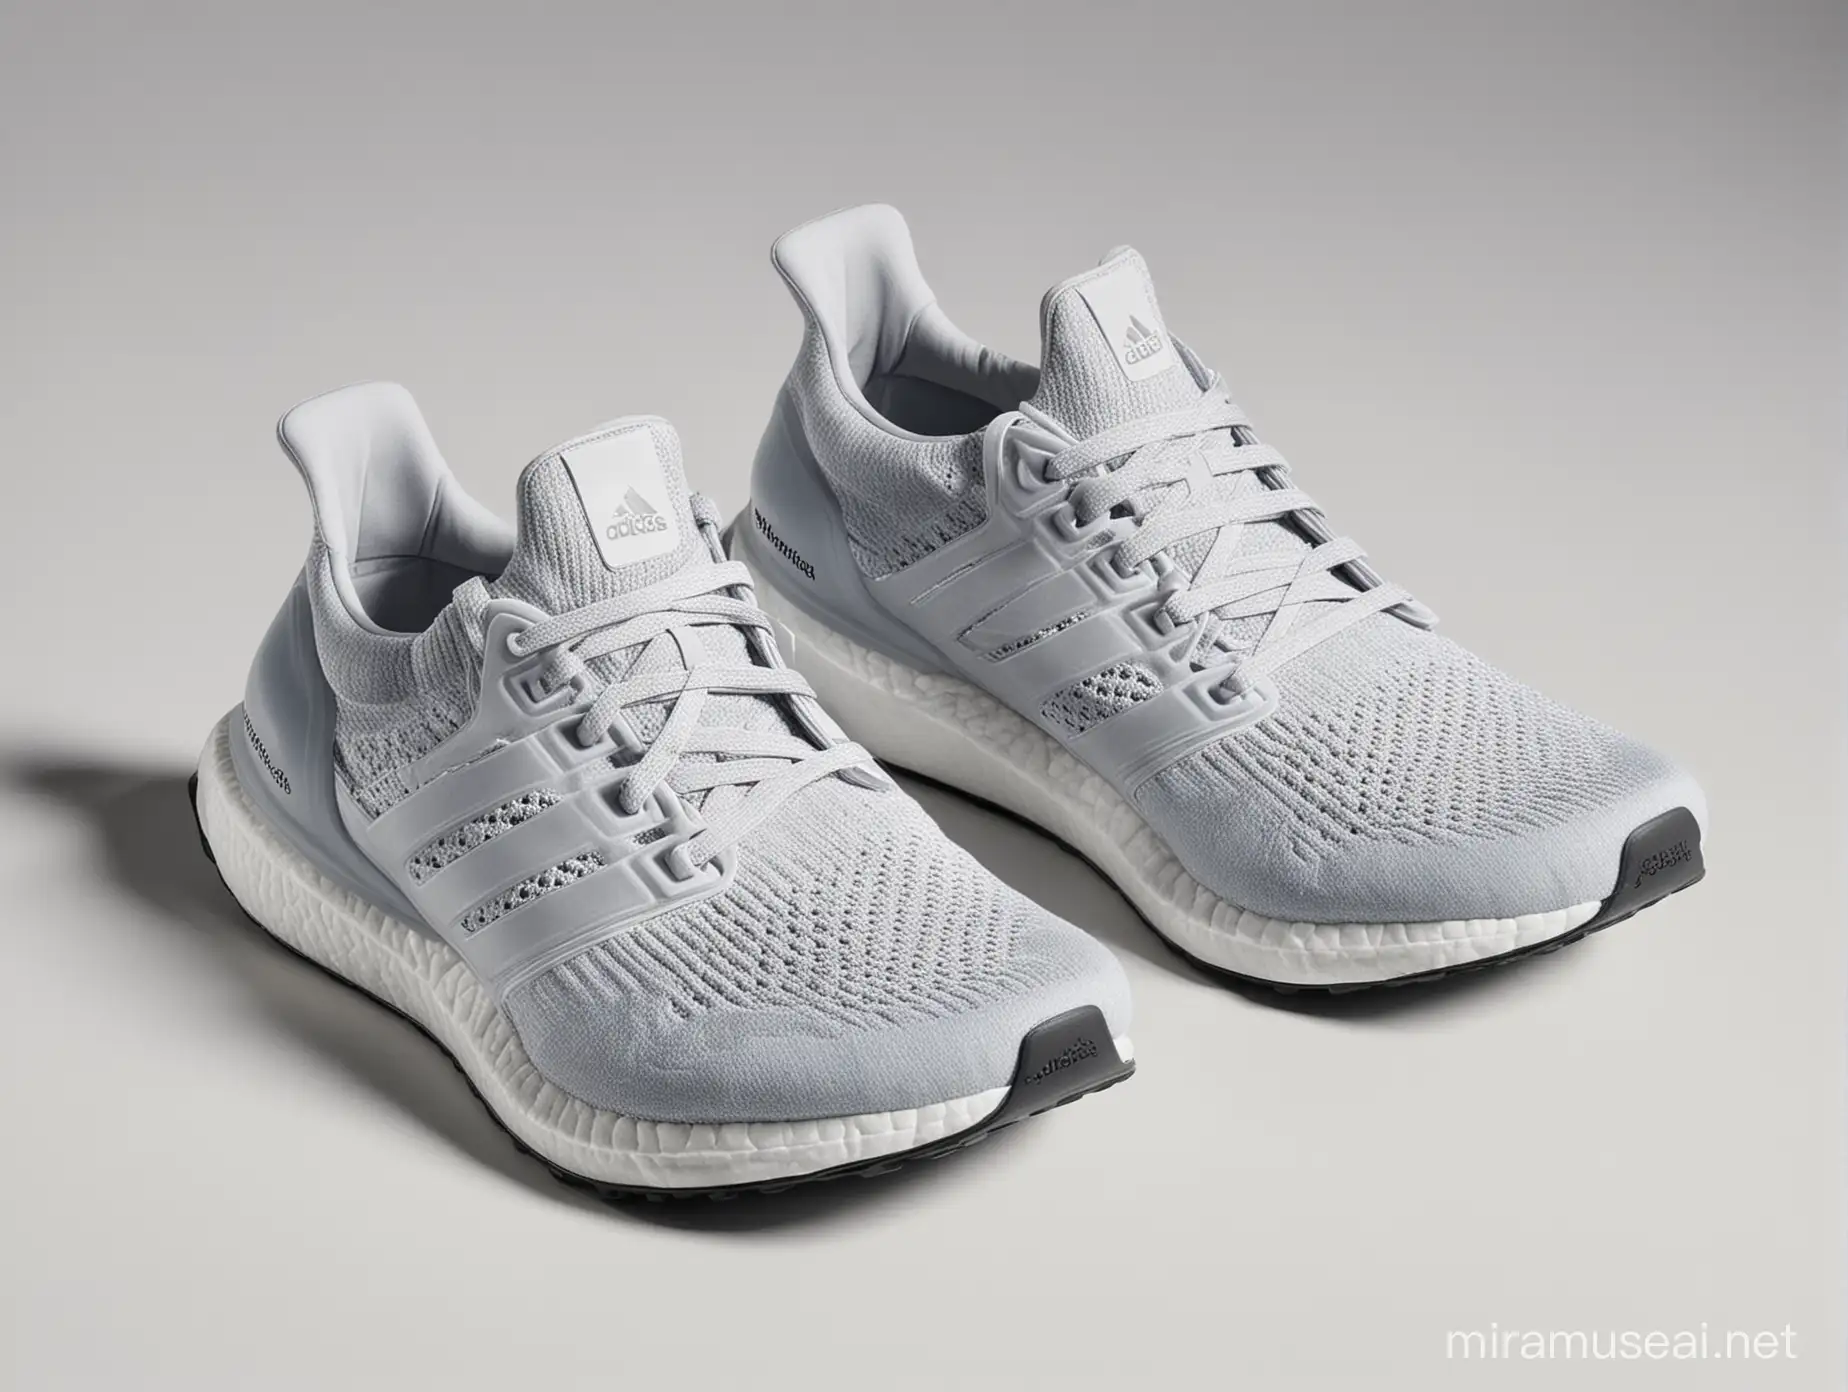 Adidas Ultraboost Light Running Shoes and the background is light grey